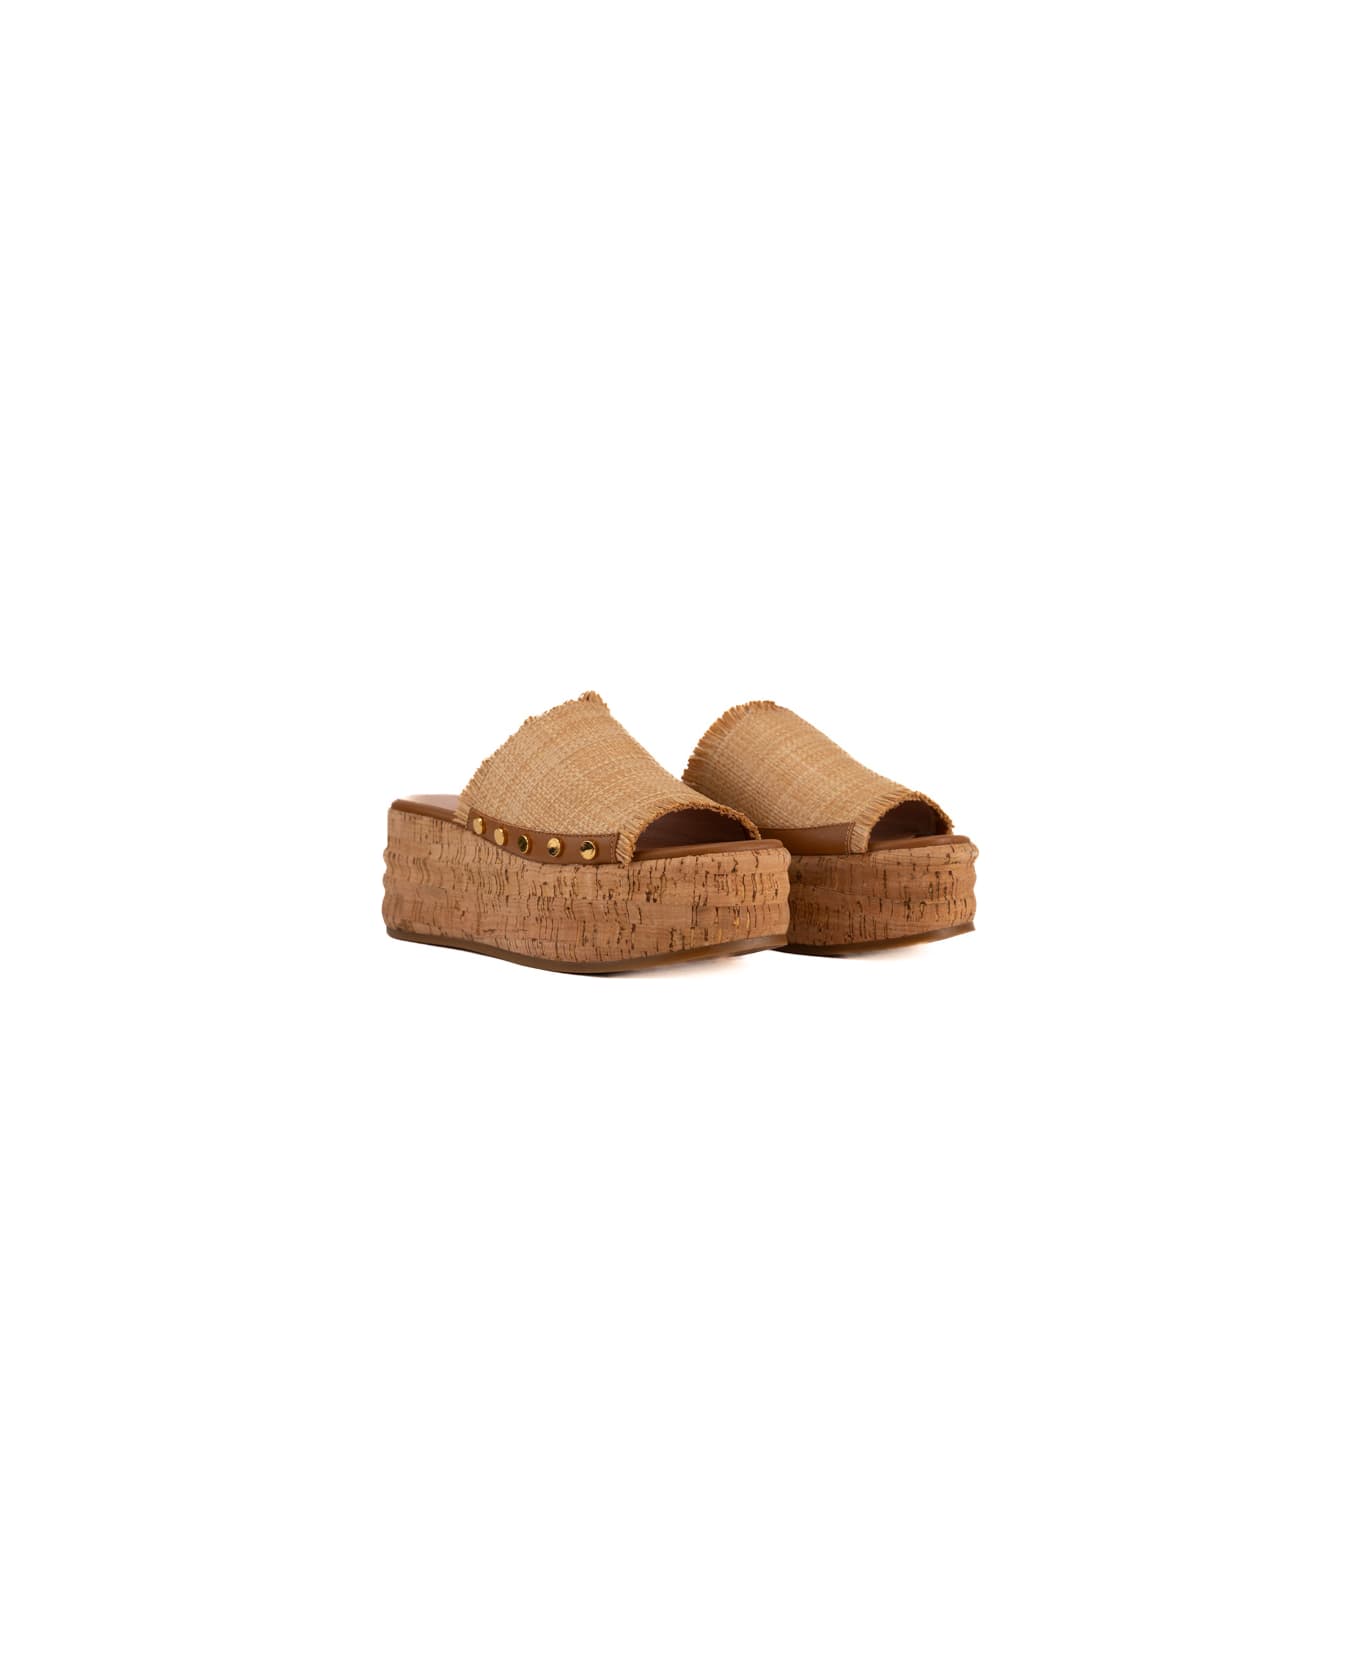 Coccinelle Raffia And Cork Wedges - Natural/cuir